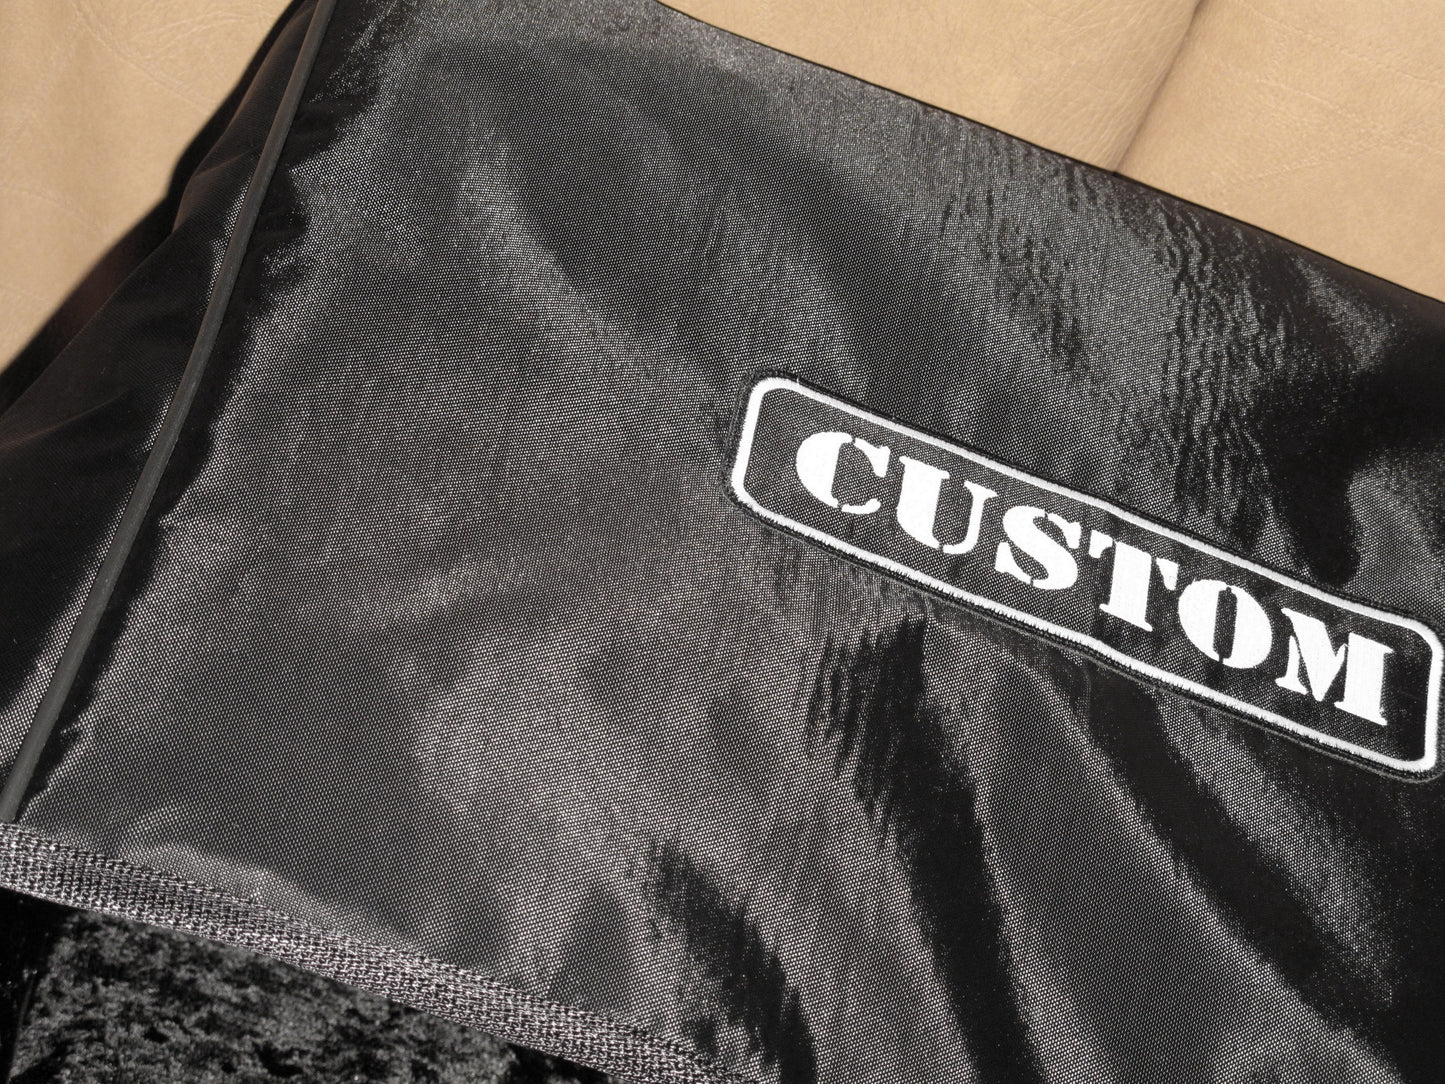 Black Hand Made Custom Padded Cover Mesa Boogie F-50 Widebody Combo Amp Guitar Amplifier Slip Cover Dust Cover Home Studio Outside